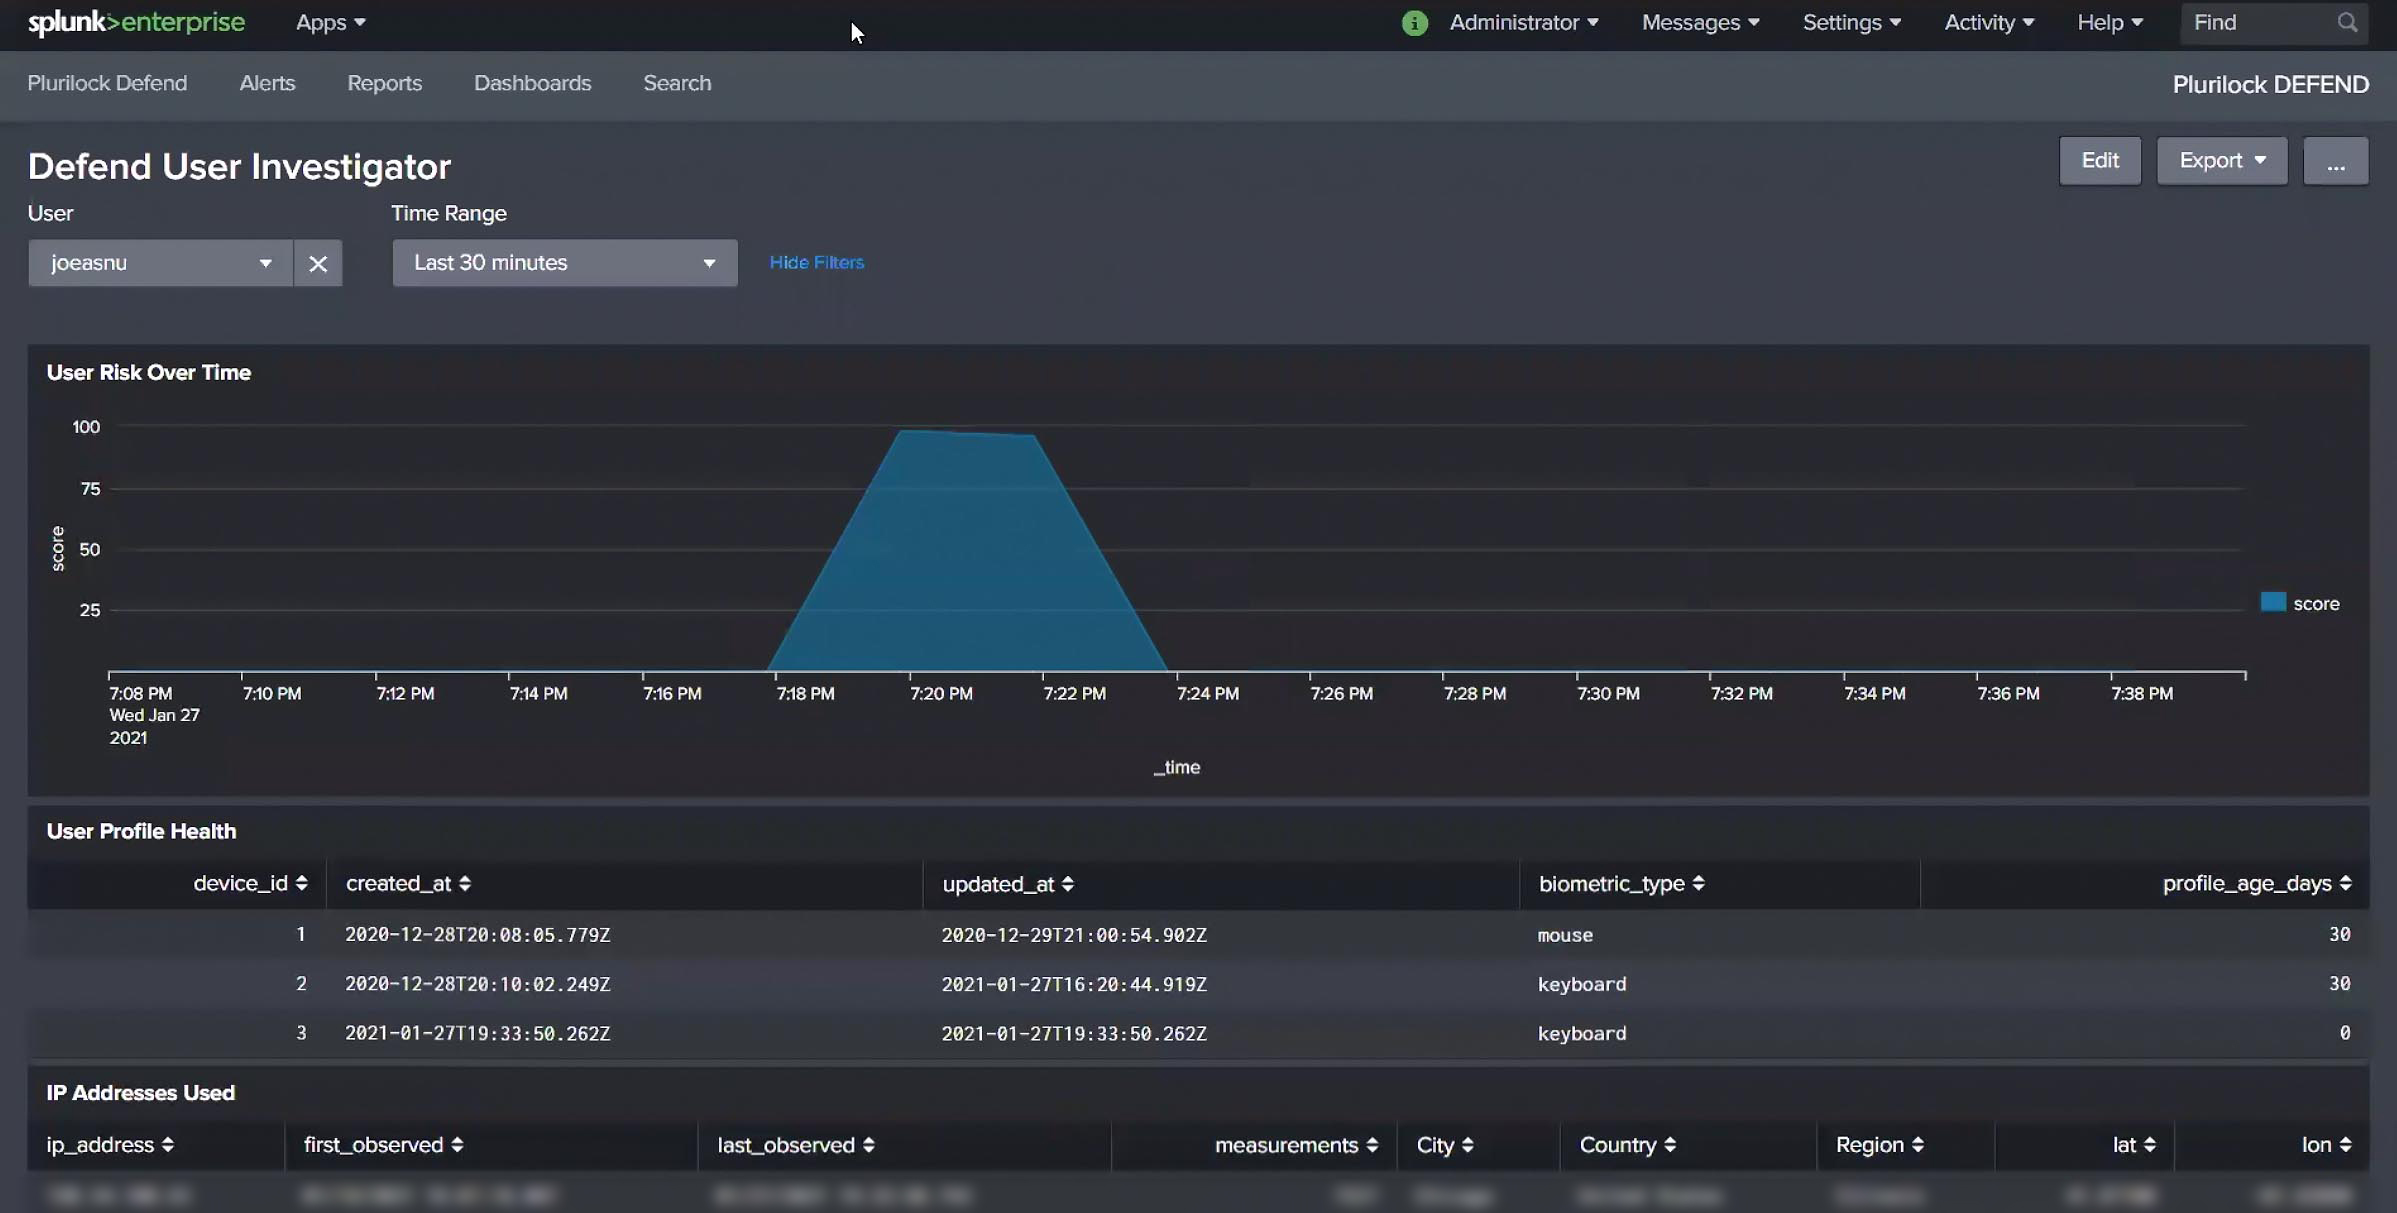 Screenshot of Splunk’s dashboard showing a high-risk event based on DEFEND data.